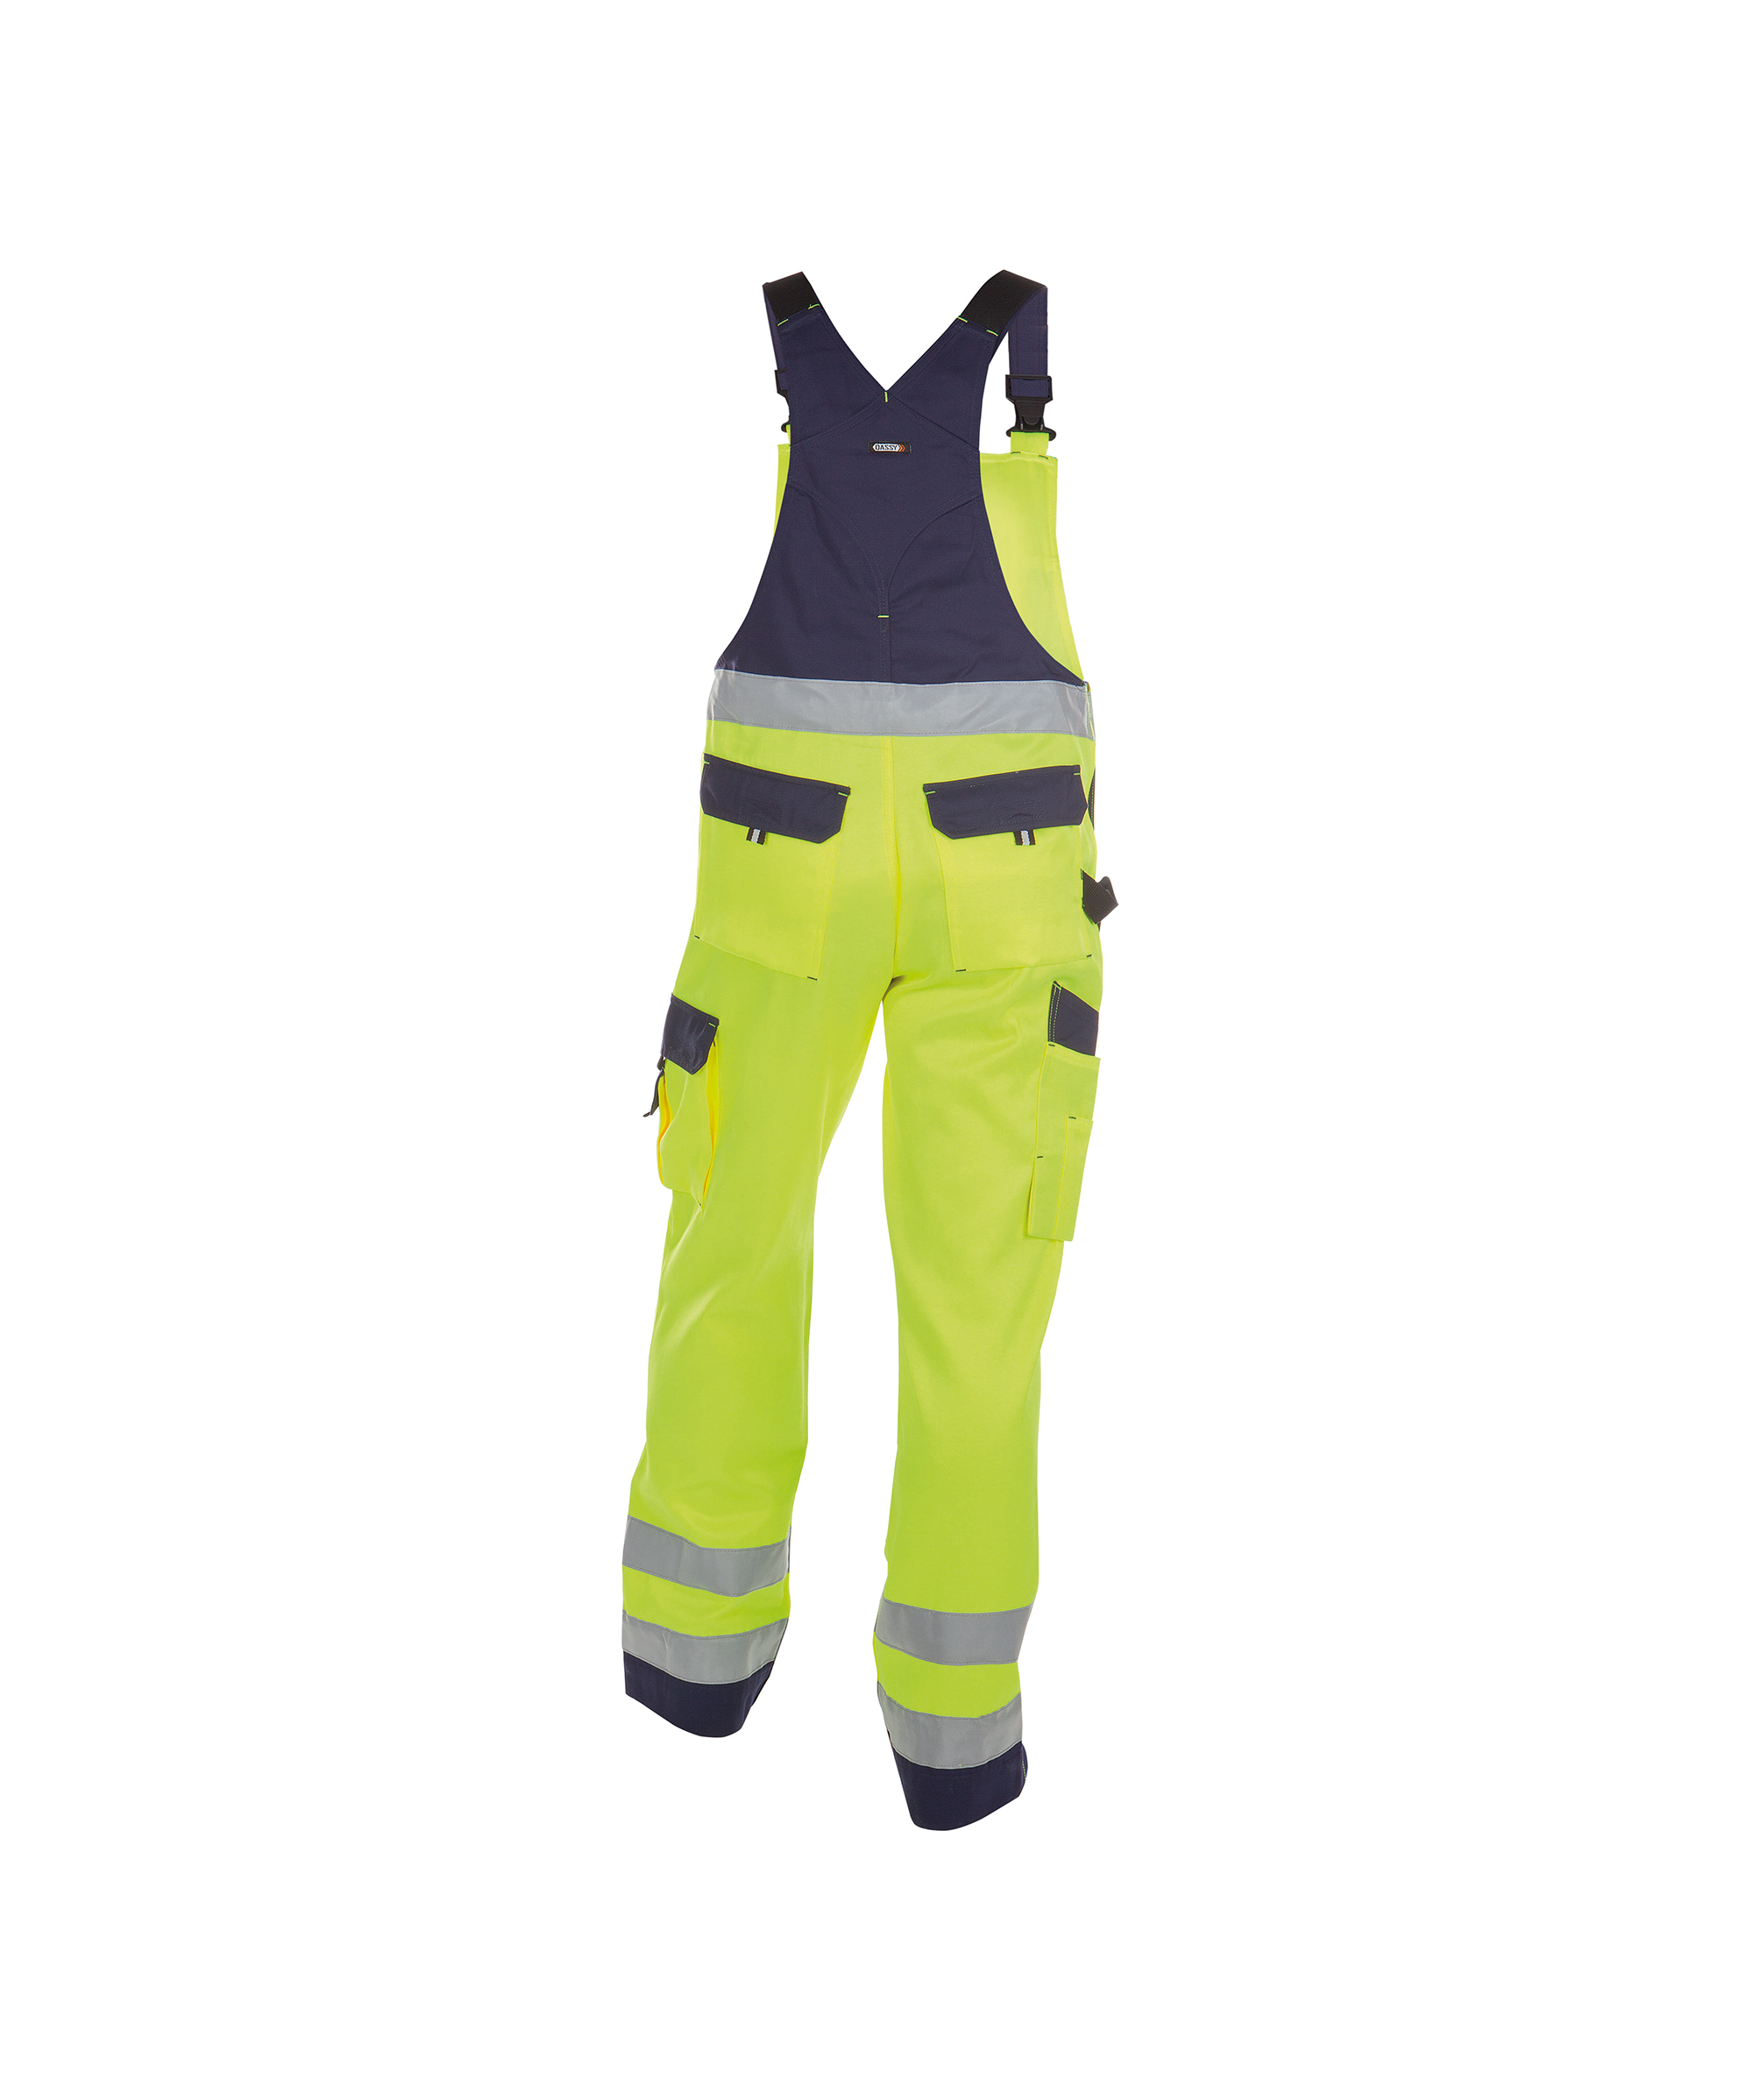 toulouse_high-visibility-brace-overall-with-knee-pockets_fluo-yellow-navy_back.jpg